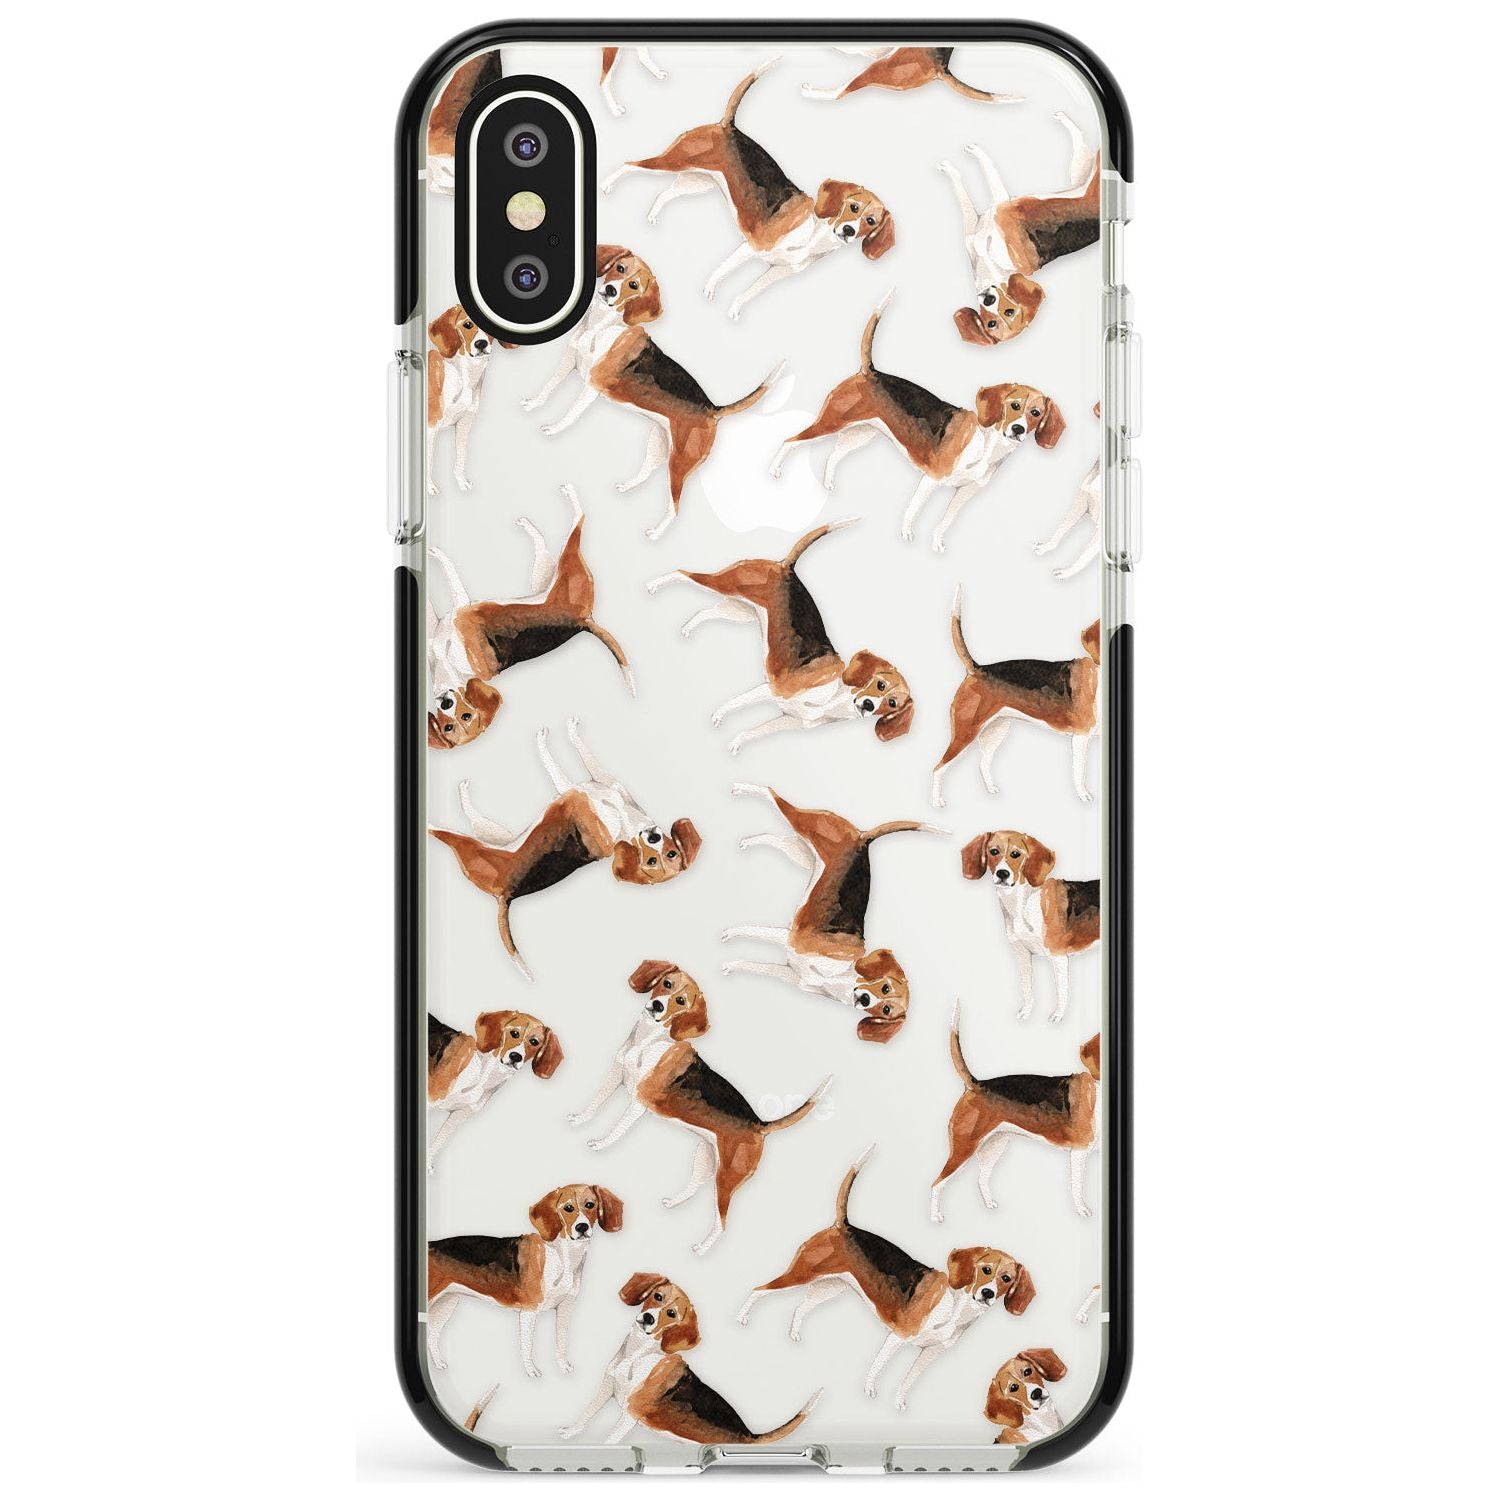 Beagle Watercolour Dog Pattern Black Impact Phone Case for iPhone X XS Max XR